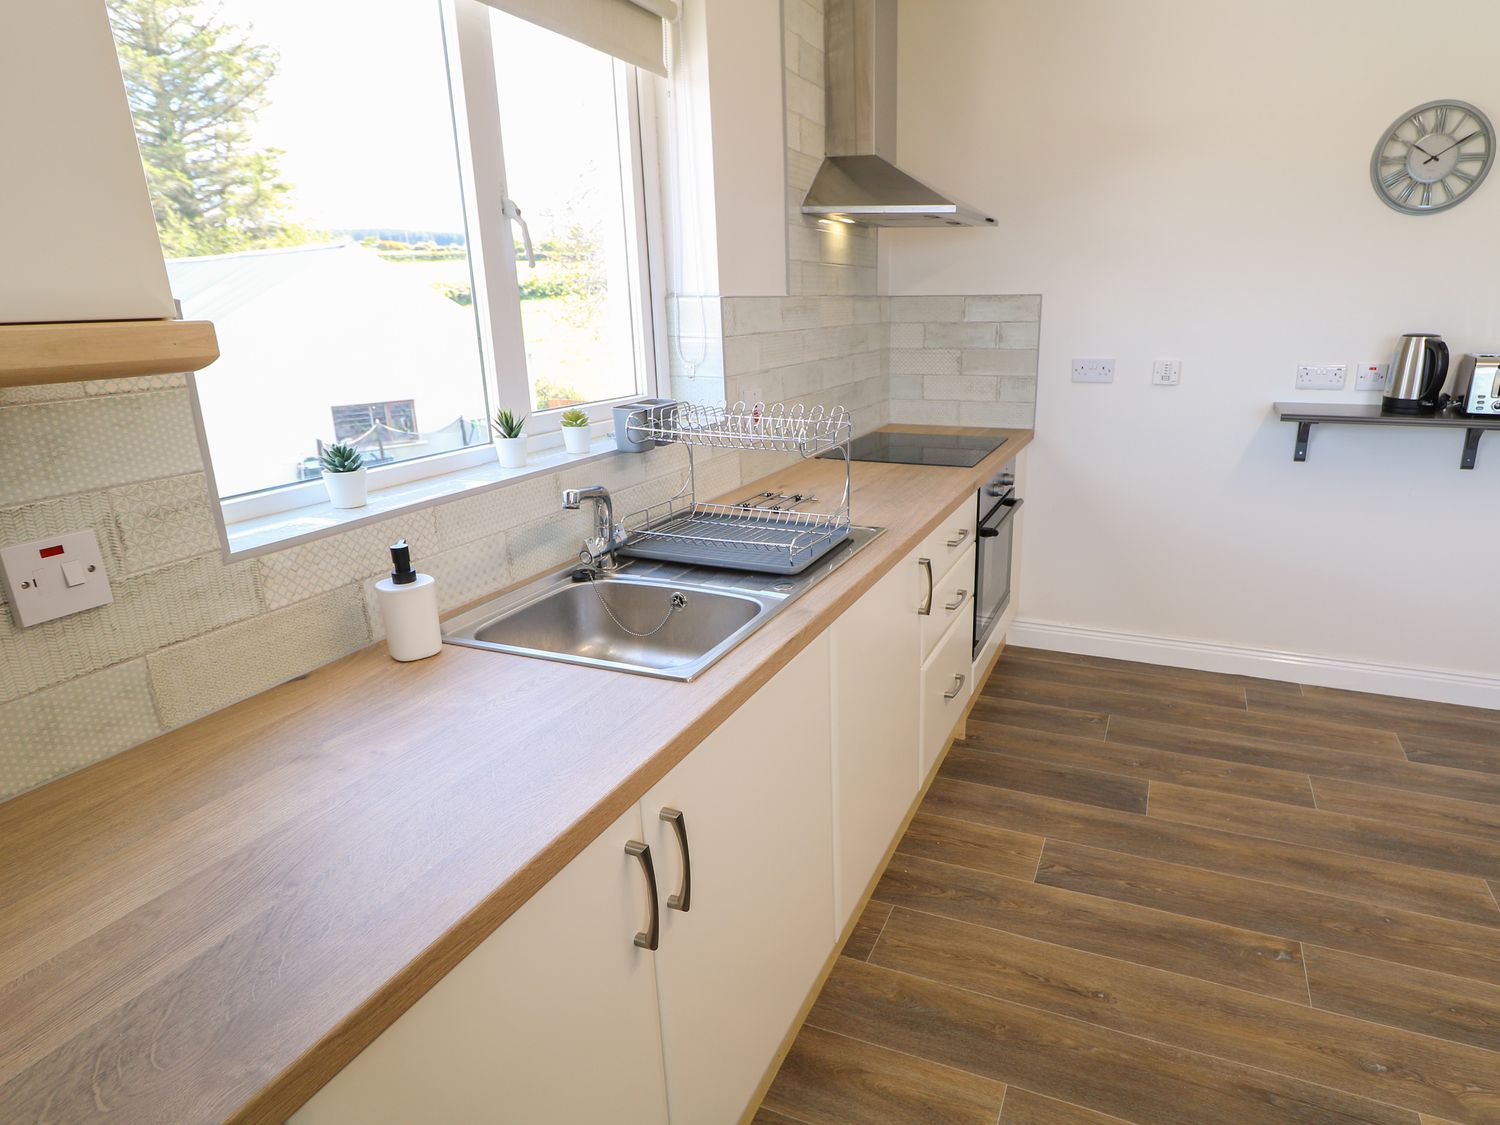 Inish Way Apartment 3, Carndonagh, County Donegal